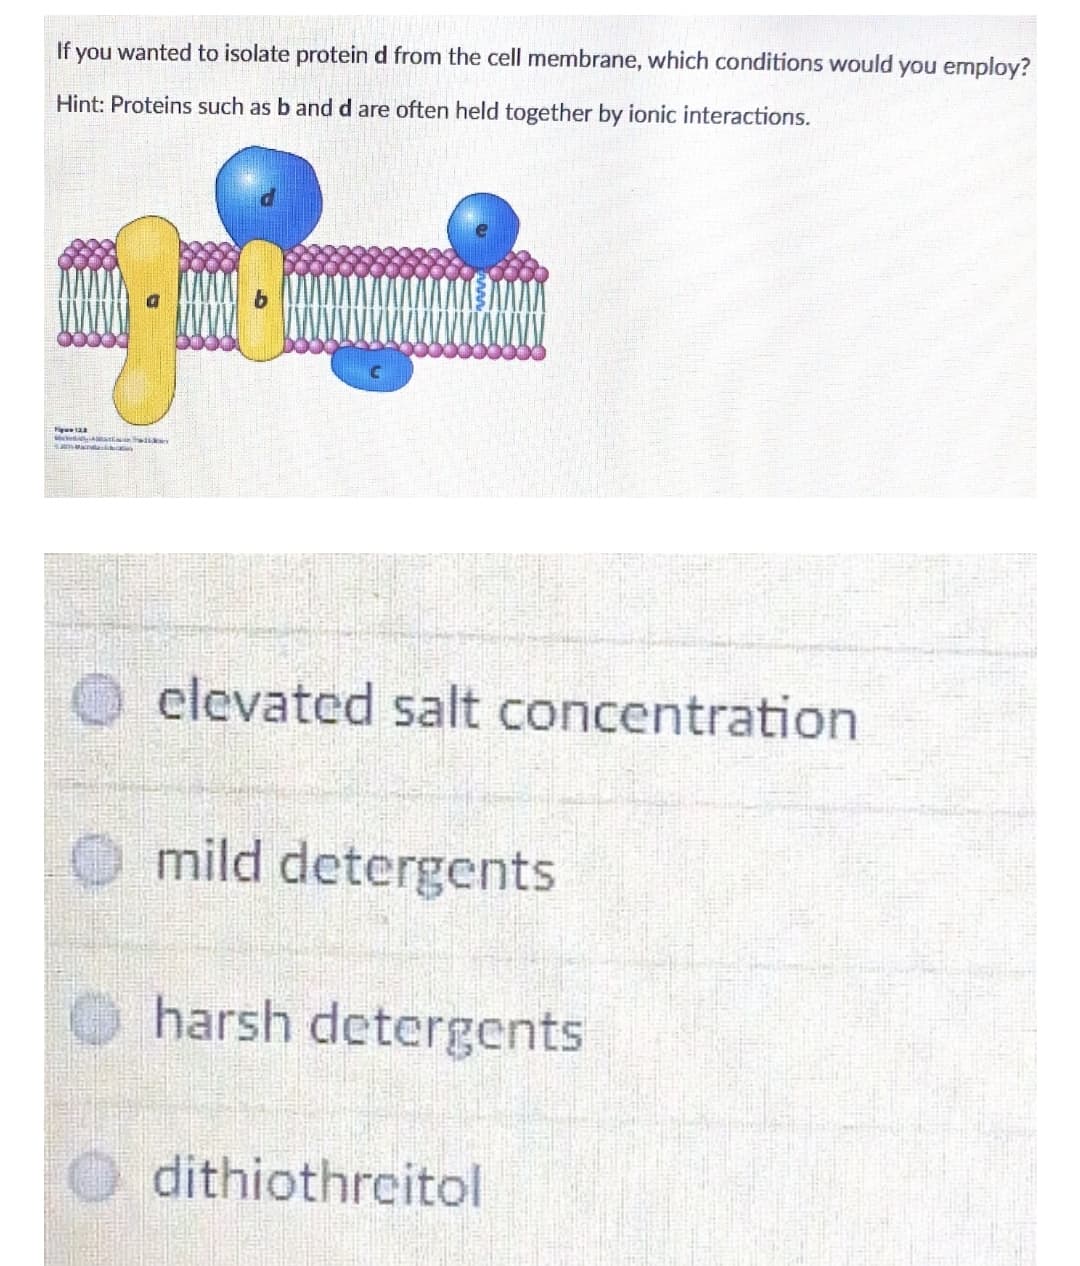 If you wanted to isolate protein d from the cell membrane, which conditions would you employ?
Hint: Proteins such as b and d are often held together by ionic interactions.
att tha
elevated salt concentration
mild detergents
harsh detergents
dithiothreitol
